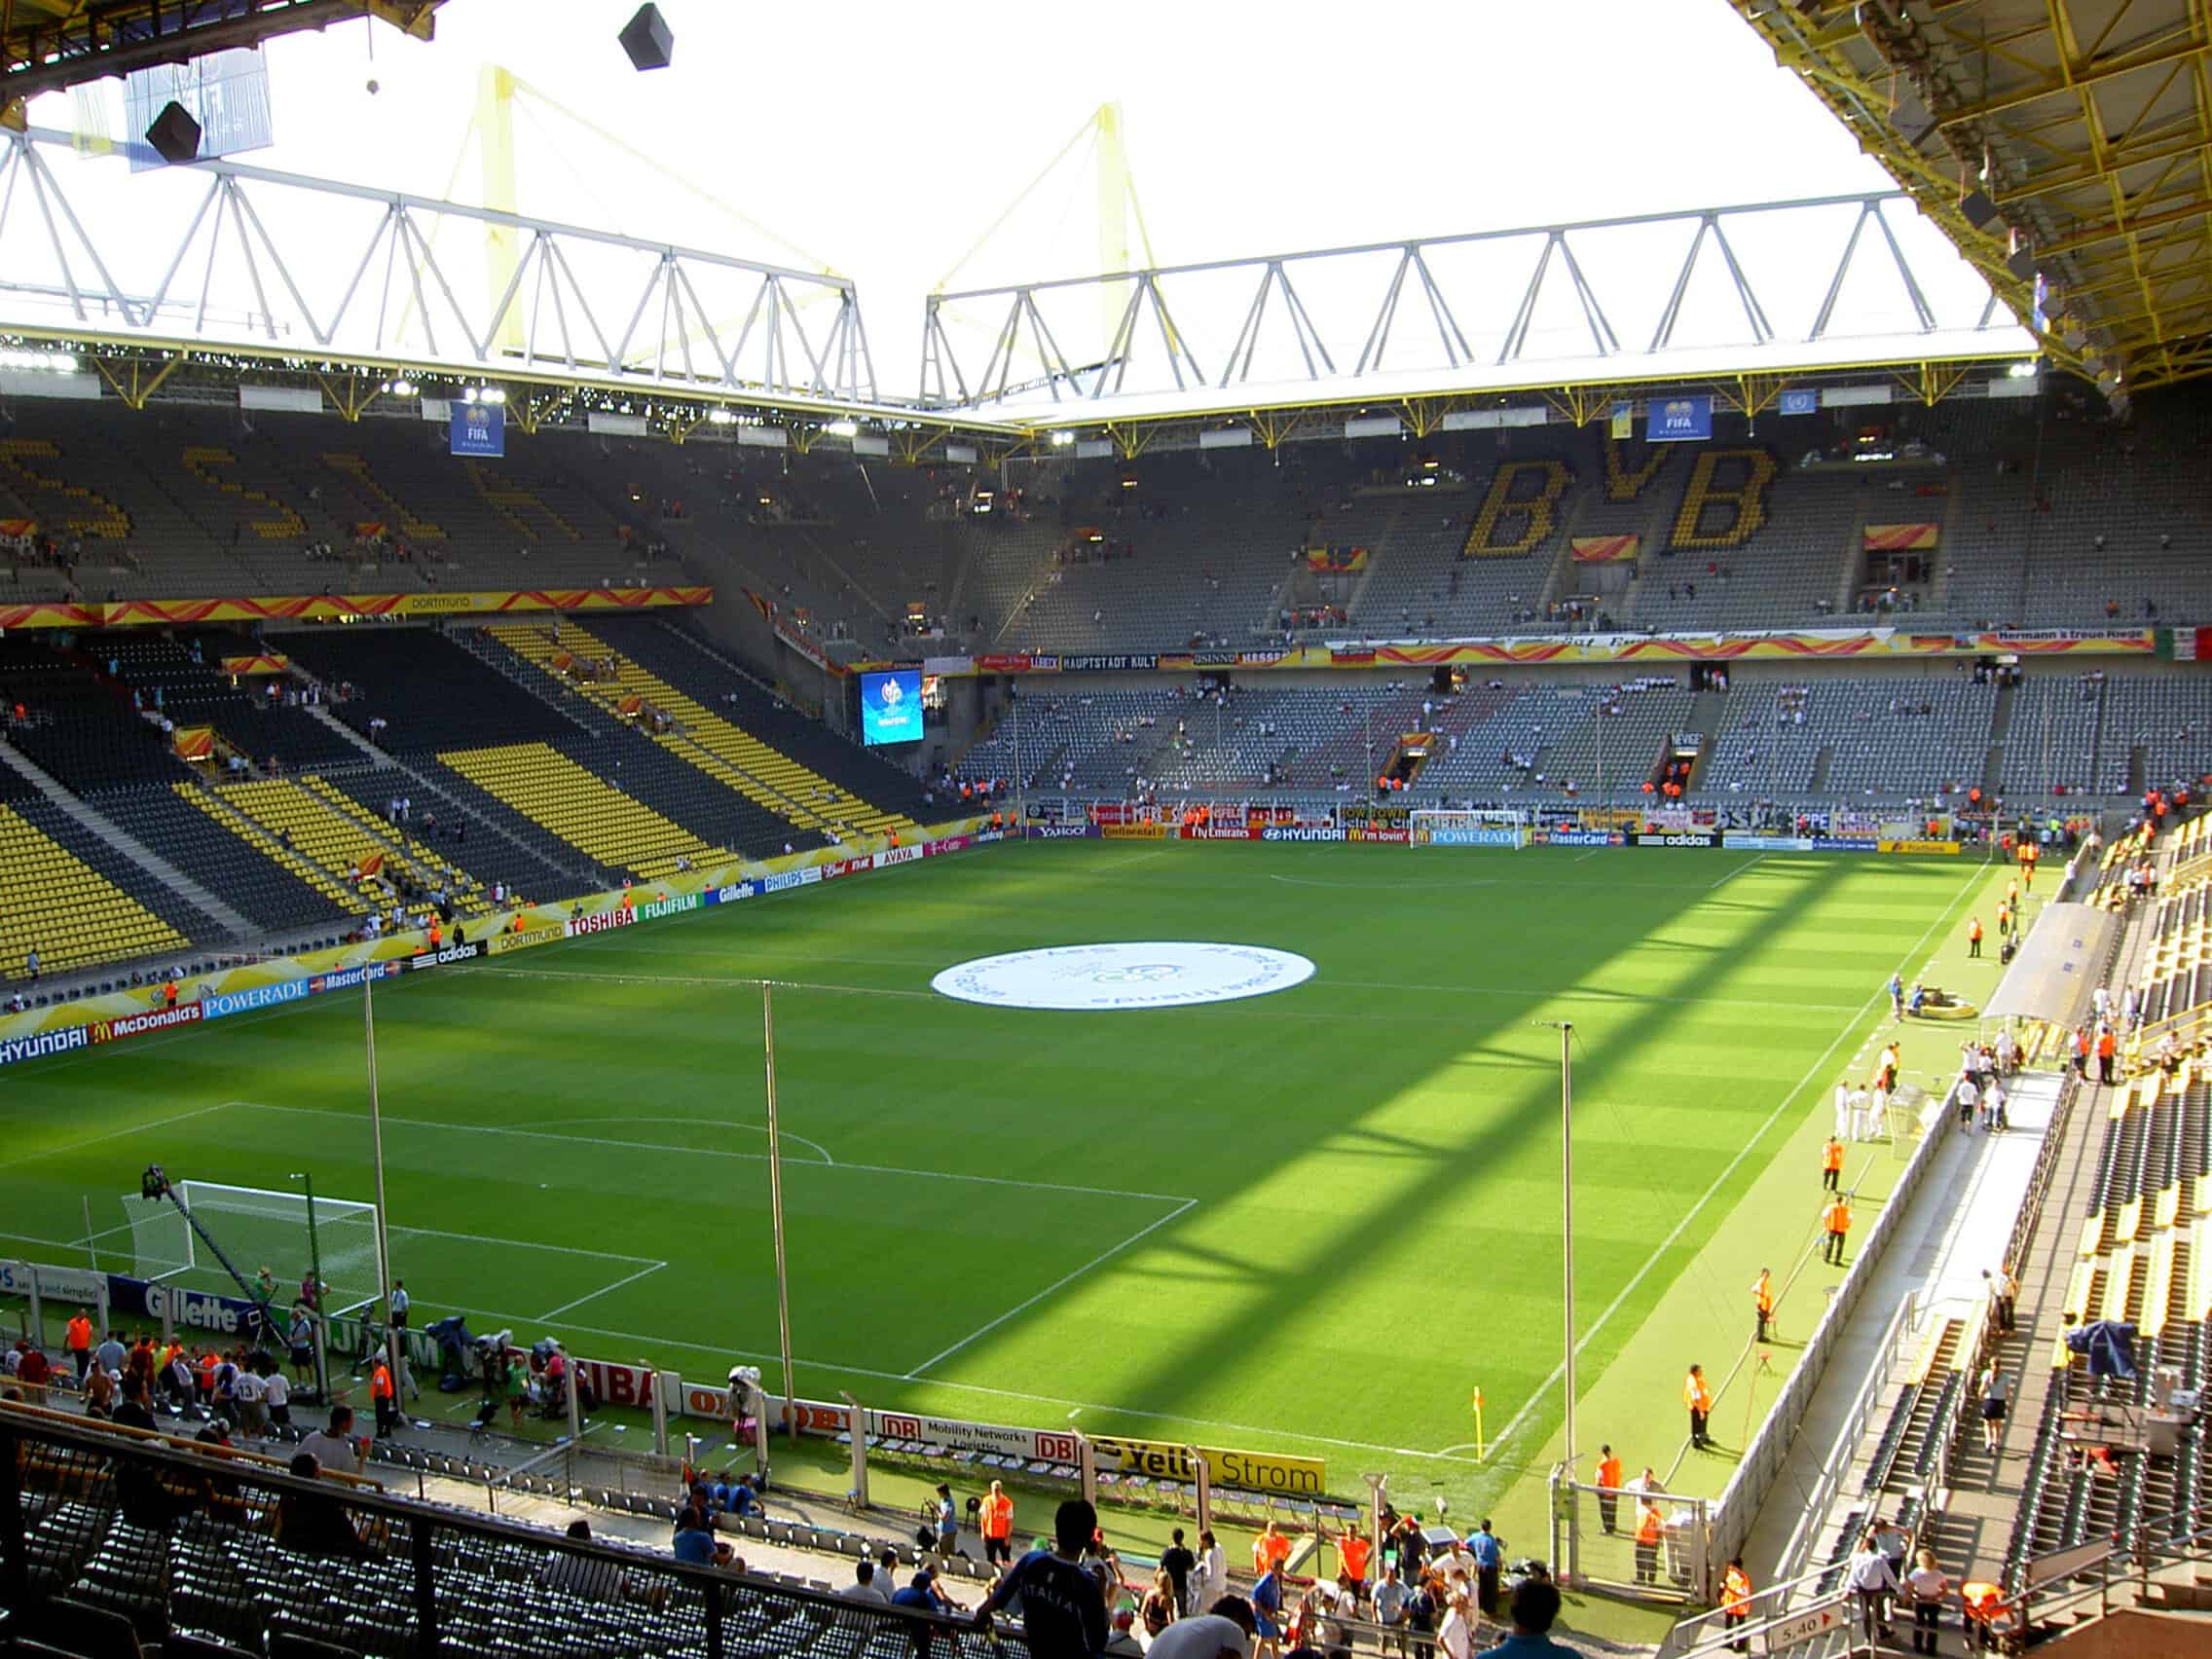 <p>The Borussia Dortmund soccer team uses the stadium as their home ground. Signal Iduna Park, formerly known as Westfalenstadion, which translates to Westphalia Stadium, has a capacity of 81,365. It is Europe's fifth-largest stadium and Germany's biggest football stadium. The Signal Iduna Park is classified by UEFA as an “elite stadium,” allowing it to host the finals of important football club competitions.</p><p>Remember to scroll up and hit the ‘Follow’ button to keep up with the newest stories from Seattle Travel on your Microsoft Start feed or MSN homepage!</p>